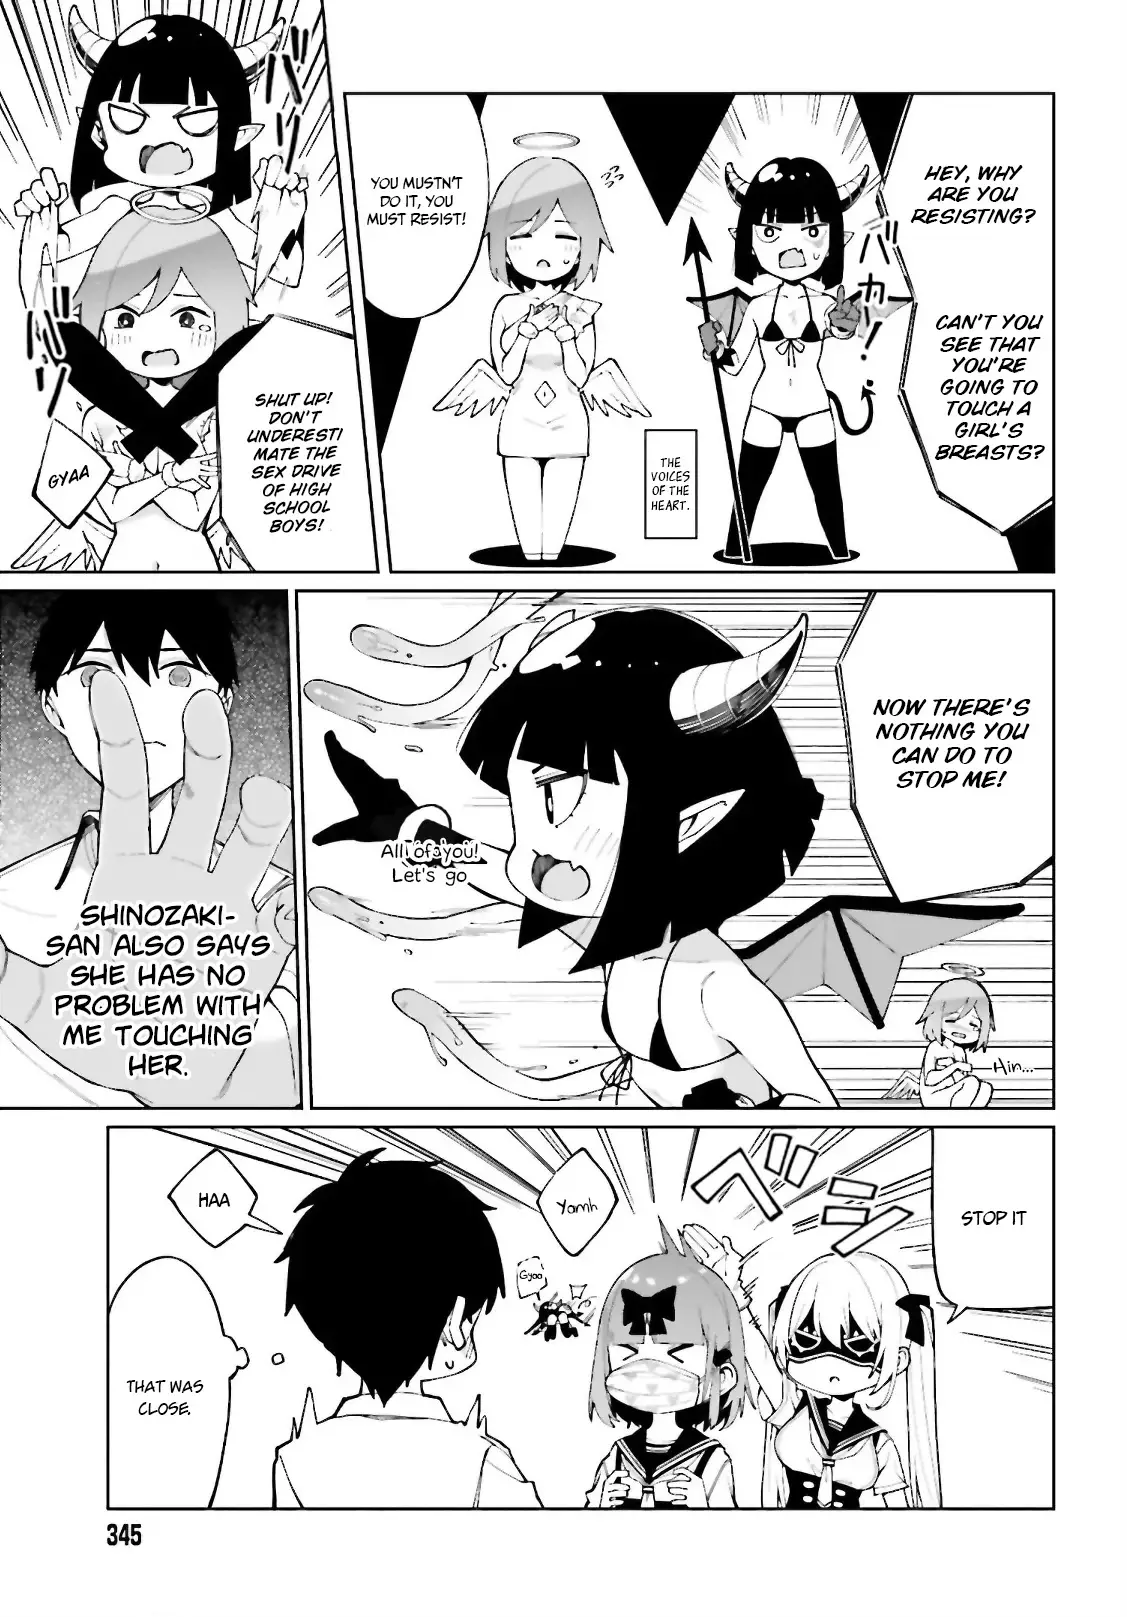 I Don't Understand Shirogane-San's Facial Expression At All - 7 page 14-0fa27922